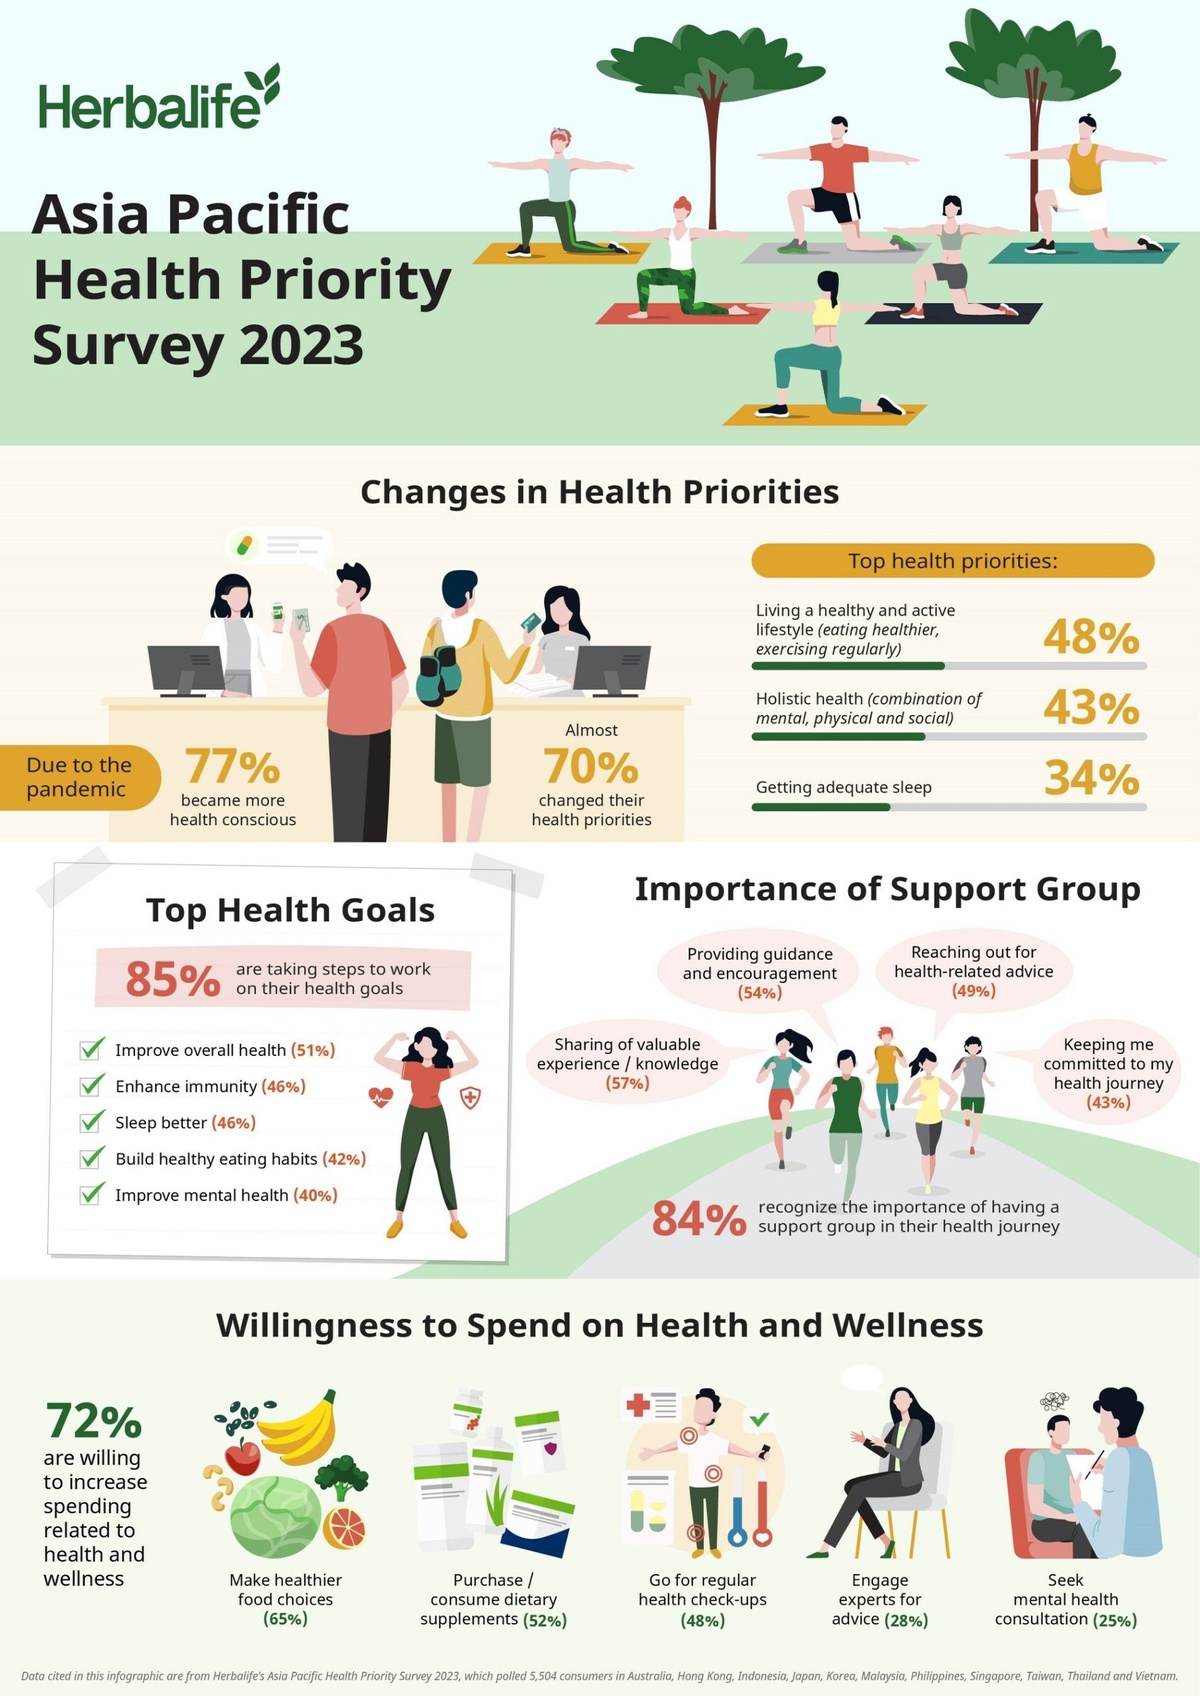 Improved Overall Health, Better Sleep, and Enhanced Immunity Ranked as Top Three Health Goals by Increasingly Health-Conscious Asia Pacific Consumers - Herbalife